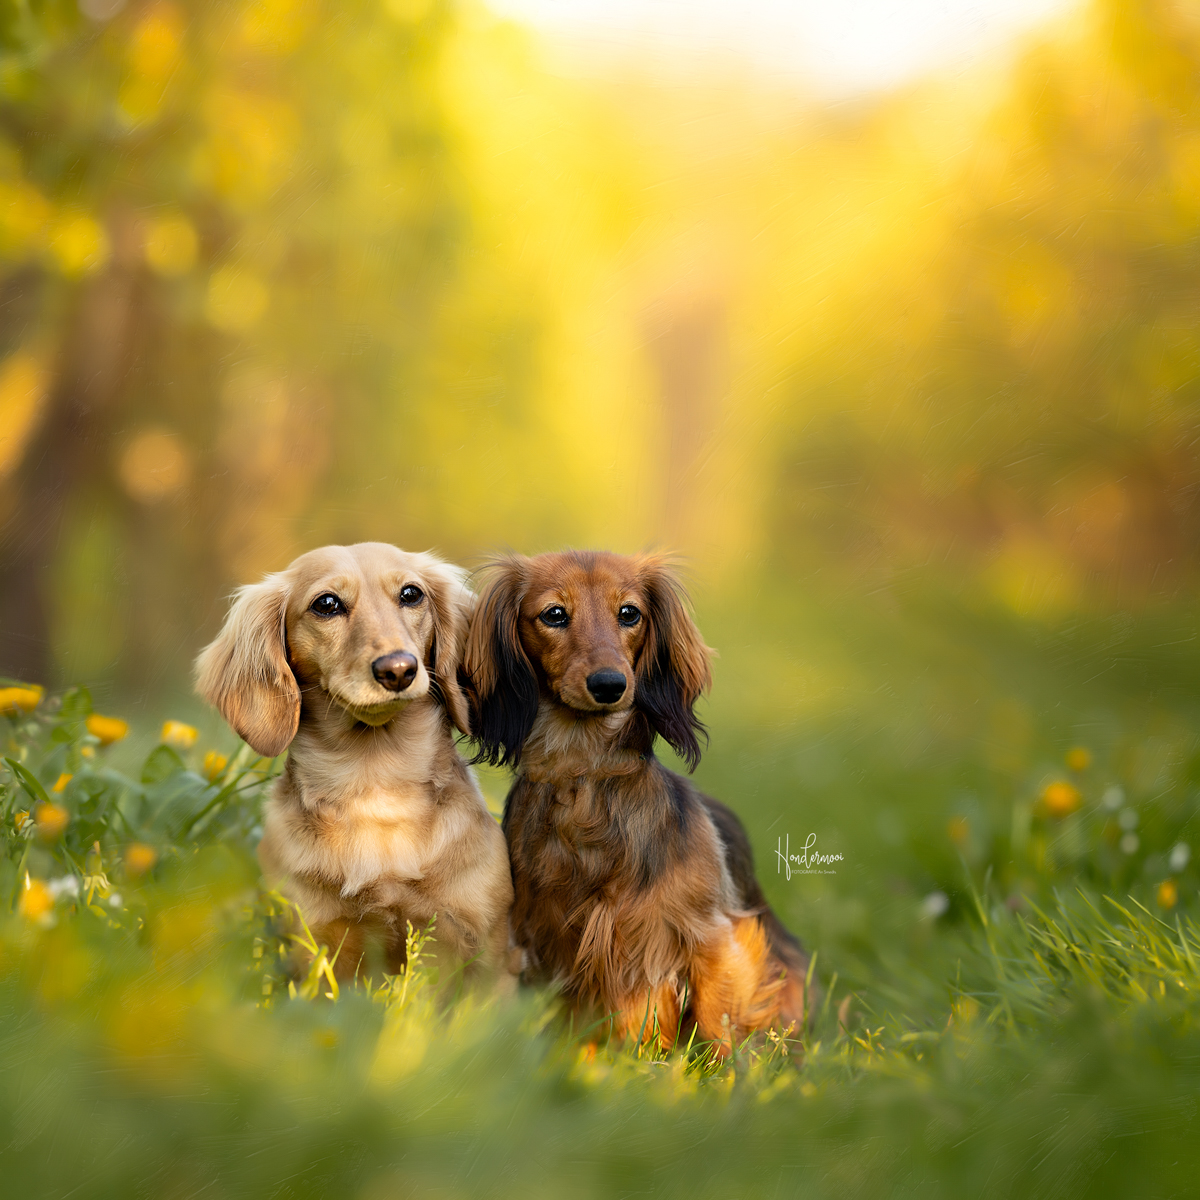 10 dog photography tips for beginners